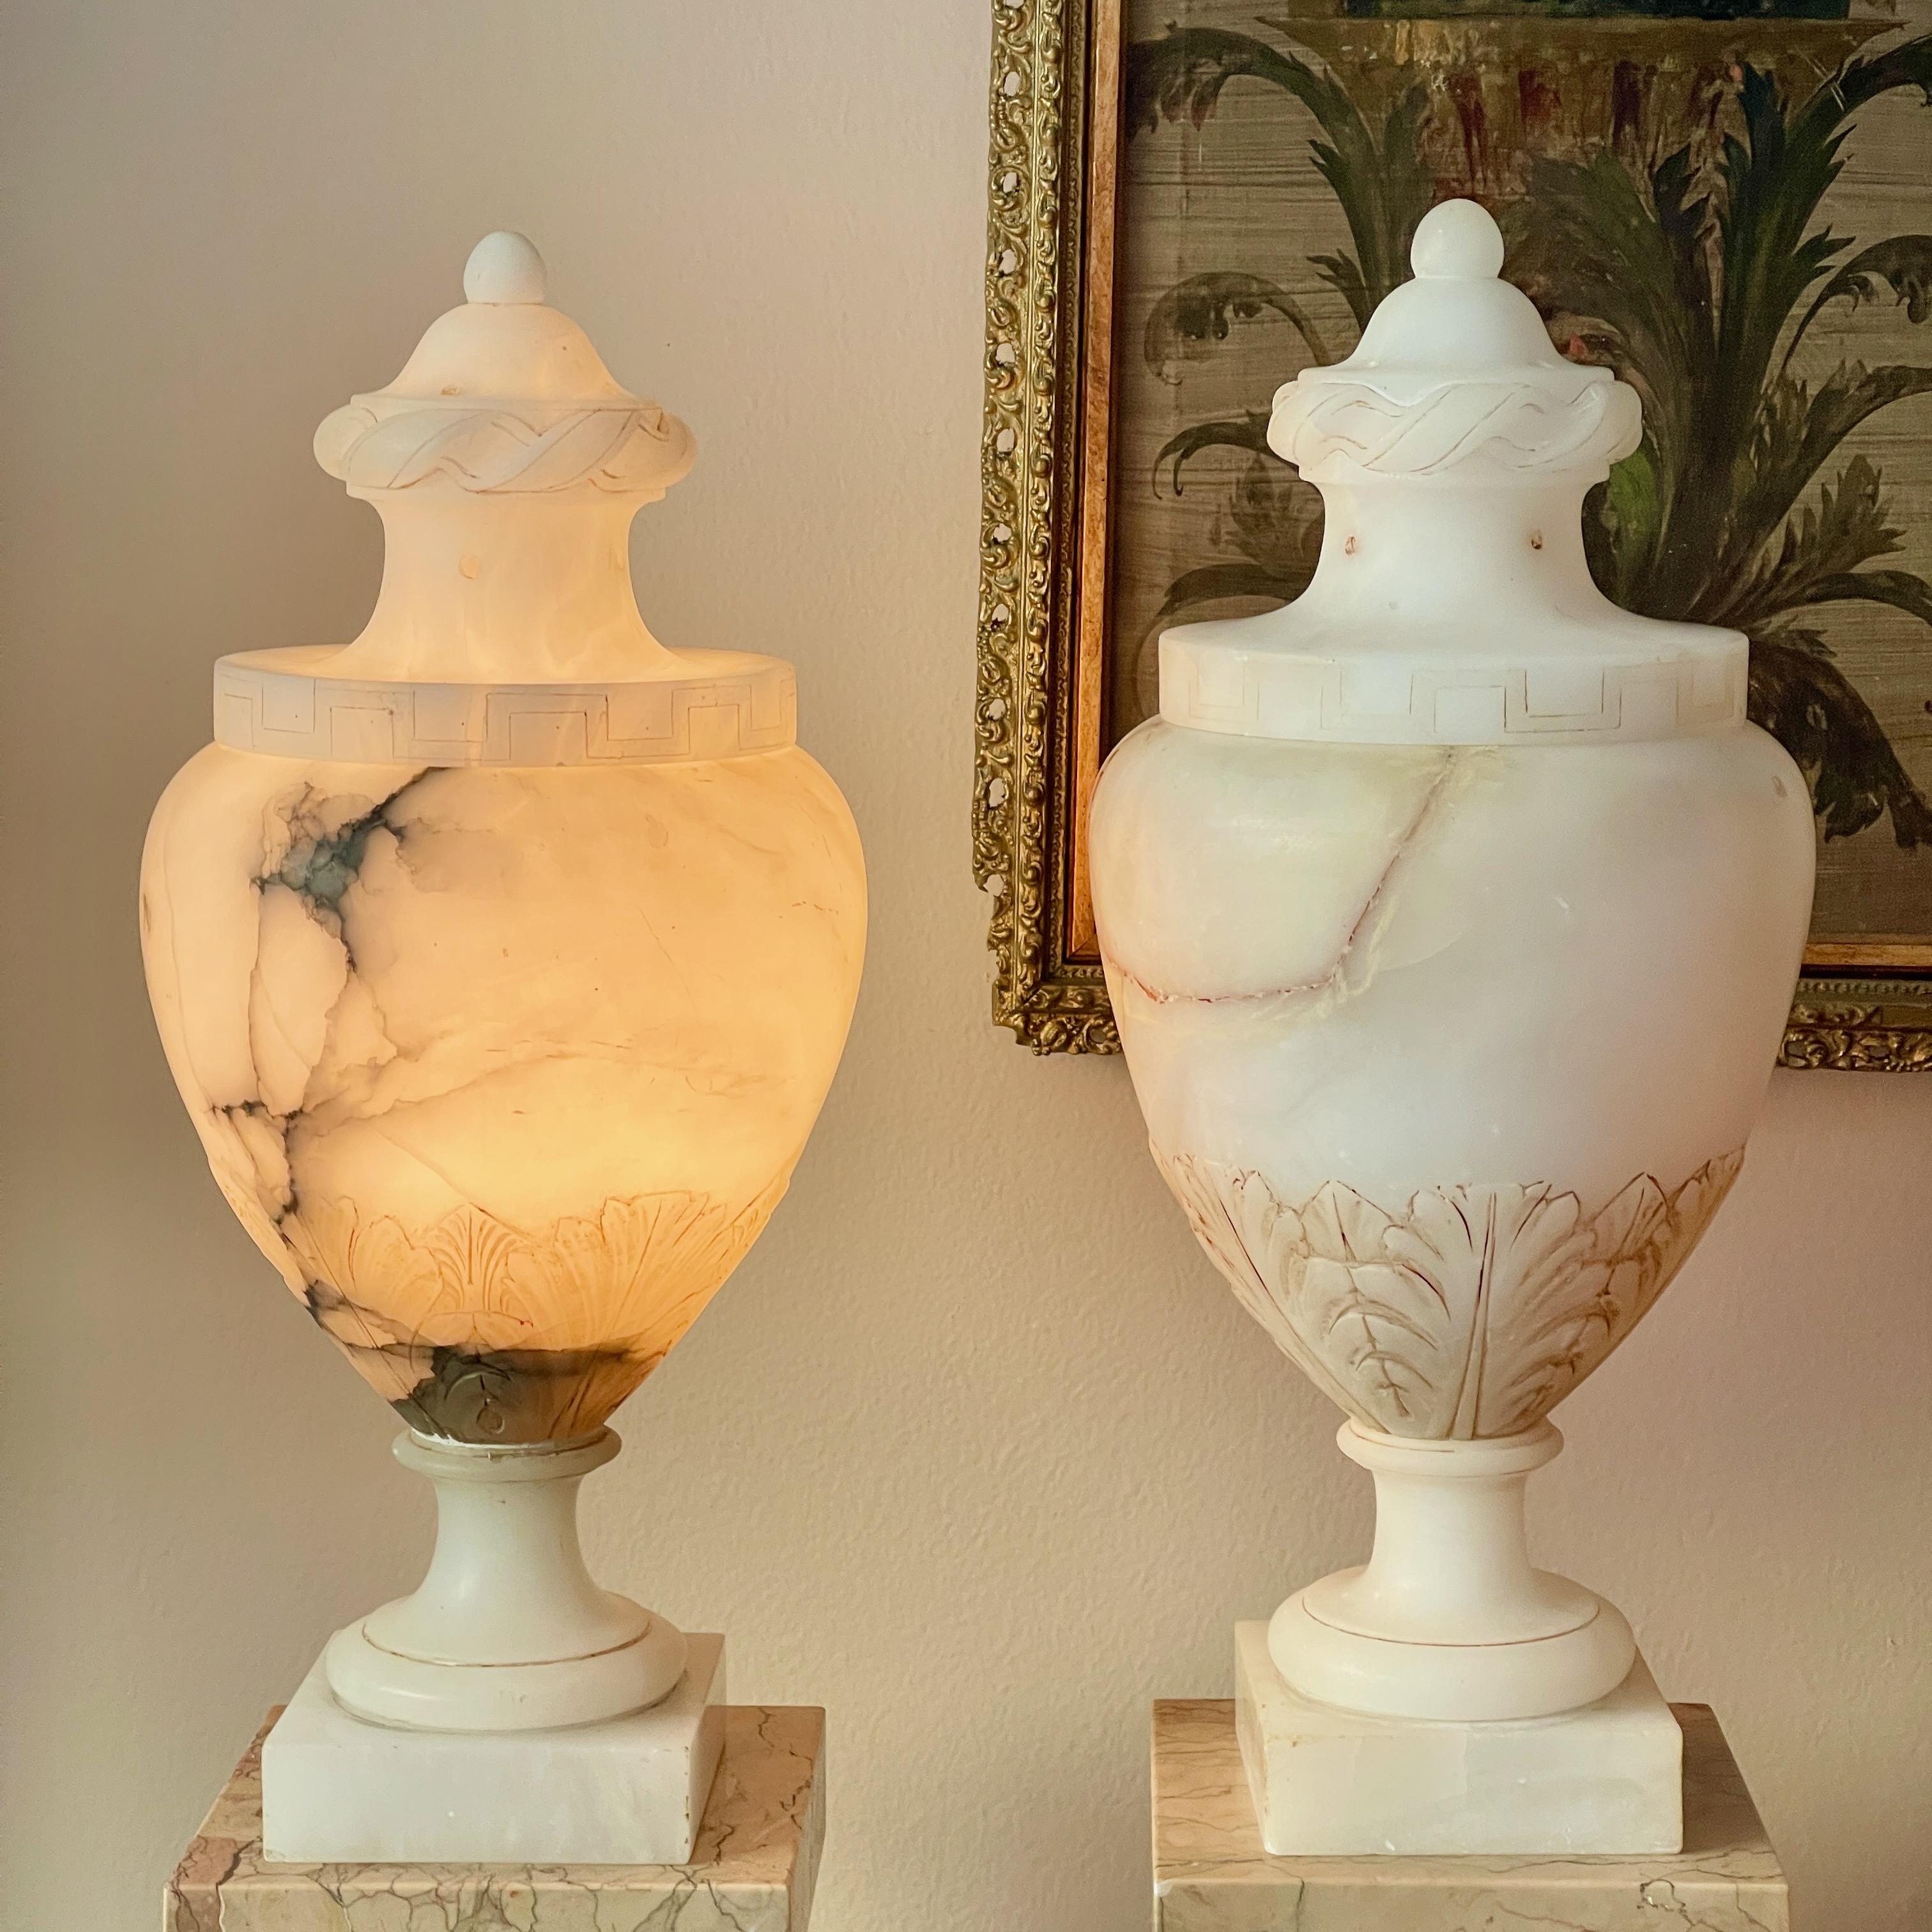 Pair of Italian alabaster lidded vase-form urns with internal illumination, wheel turned foot and base and delicate carving of acanthus leaves on the lower side of urns and greek key motif to rim of lids.
These are an elegant classical form and